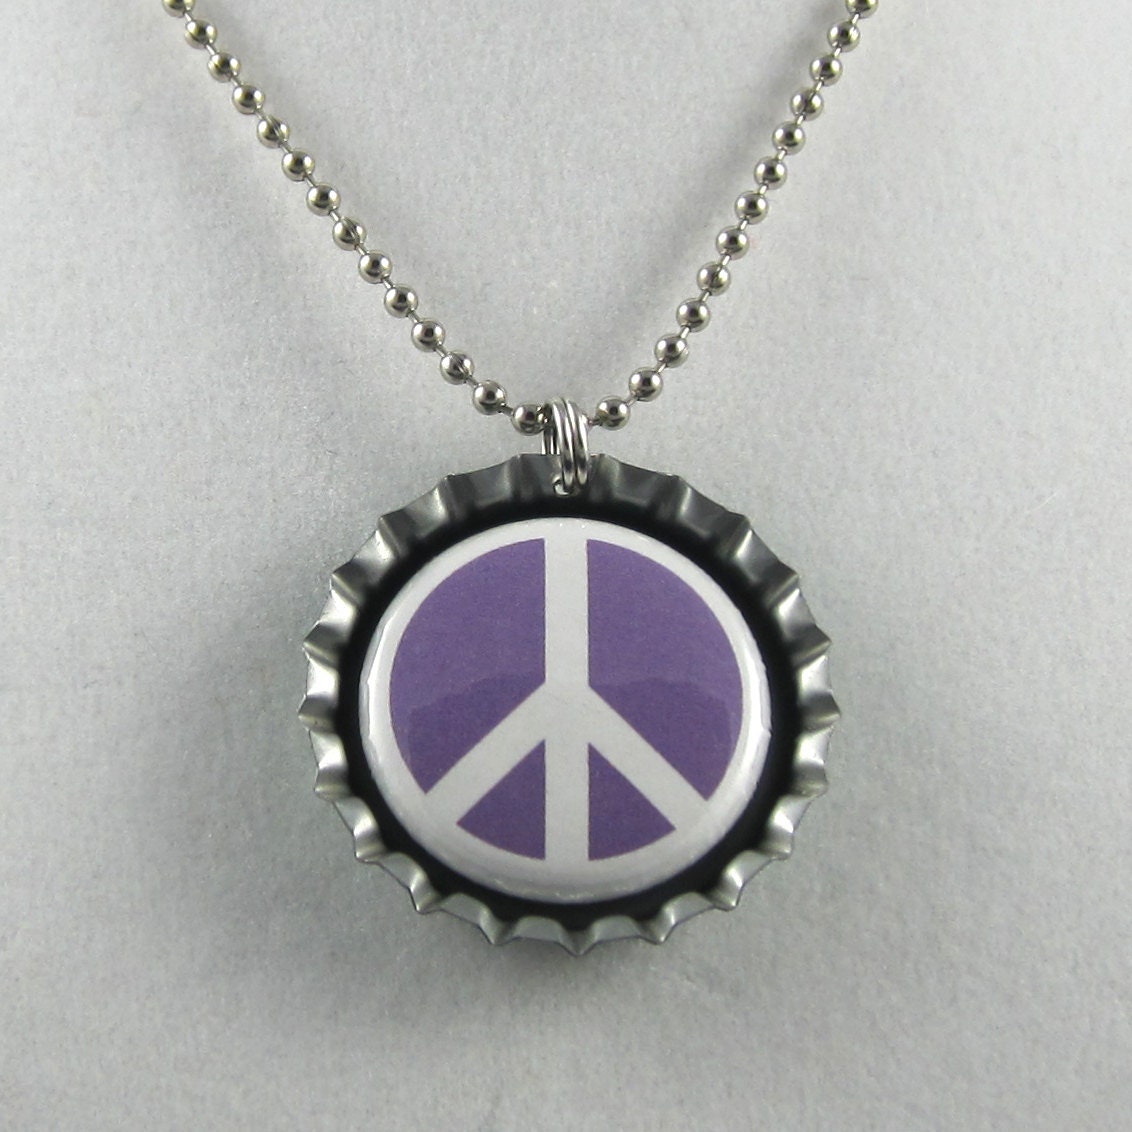 Bottle  Necklace on Magnetic Purple Bottle Cap Necklace With Chain   2 Magnet Inserts